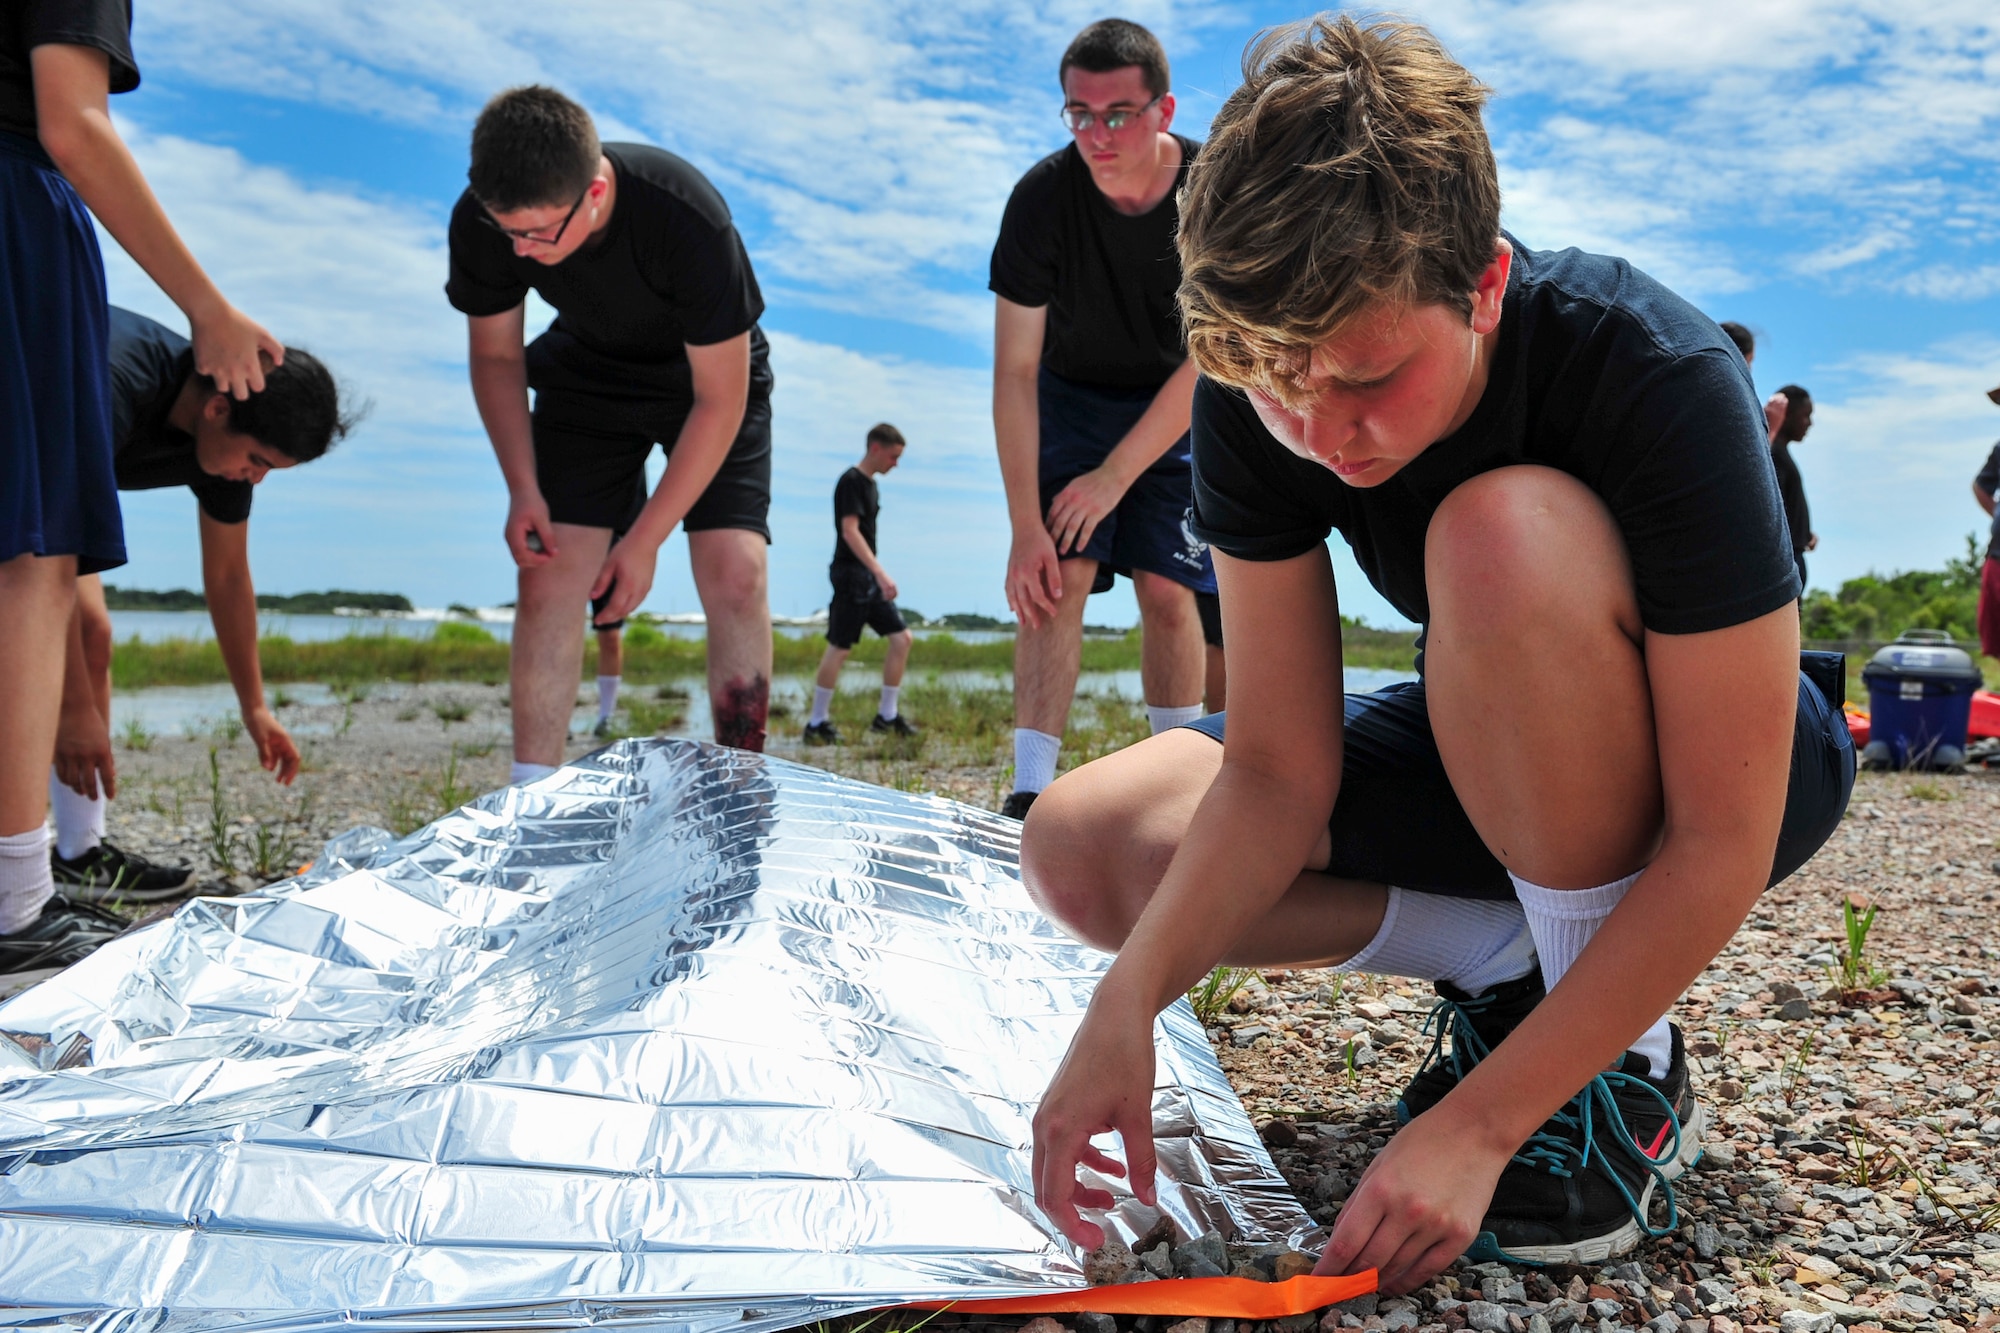 A Junior ROTC cadet anchors down a reflective blanket to make a rescue signal during survival, evasion, resistance and escape training at Hurlburt Field, Fla., June 29, 2017. SERE specialists with the 1st Special Operations Support Squadron gave Summer Leadership School cadets a crash course on SERE, including signaling aircraft, starting fires with natural resources, and crafting shelters in the wilderness. (U.S. Air Force photo by Staff Sgt. Victor J. Caputo)